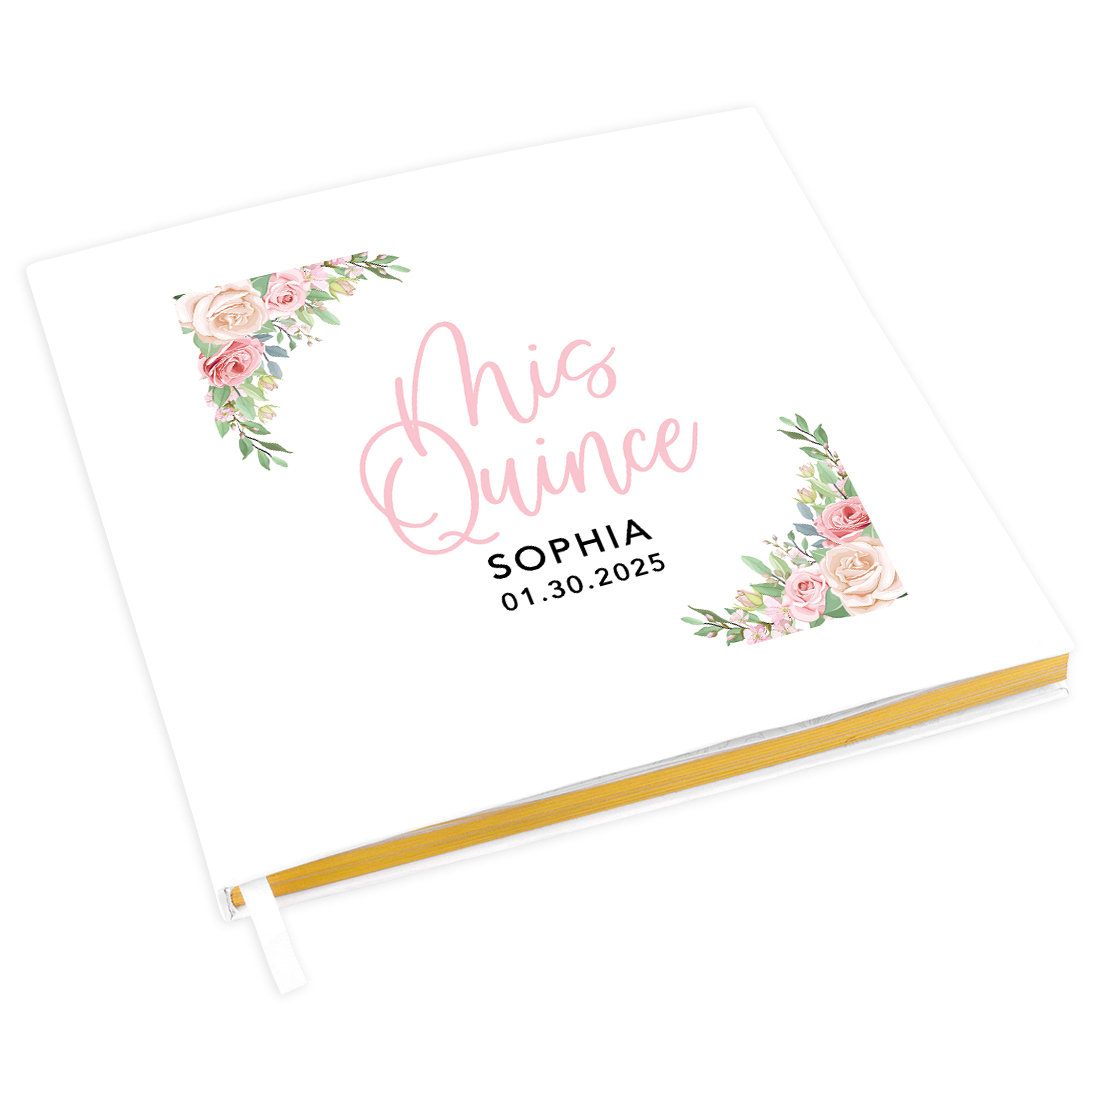 Wedding Guest Book - Personalized Polaroid Guest Book for Wedding with Pen  120 Pages Hardcover 8 x 10, Good as Wedding Scrapbook & Reception